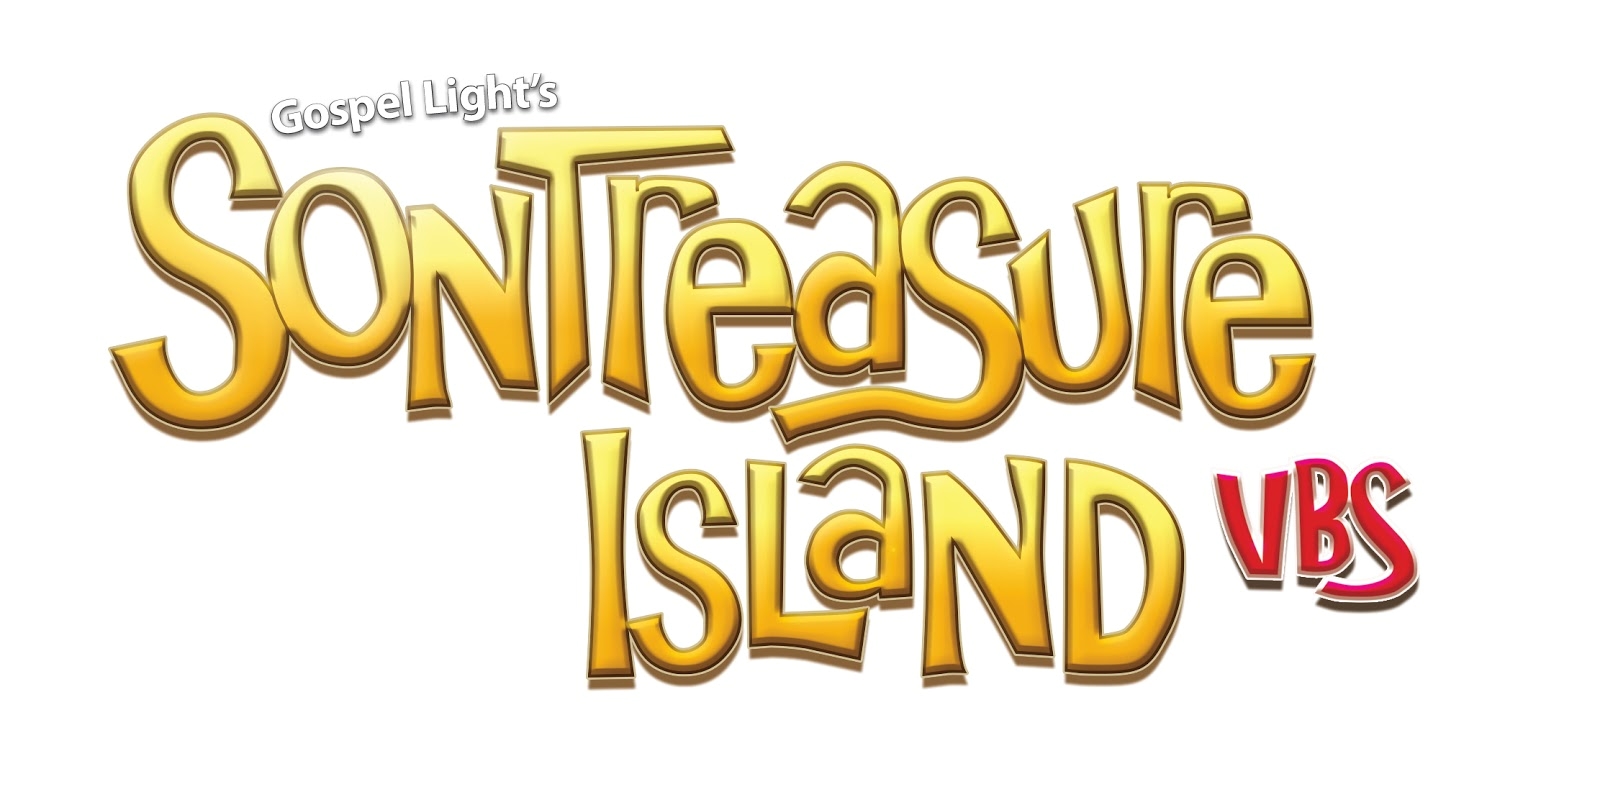 vbs 2014 sontreasure island by gospel light give away